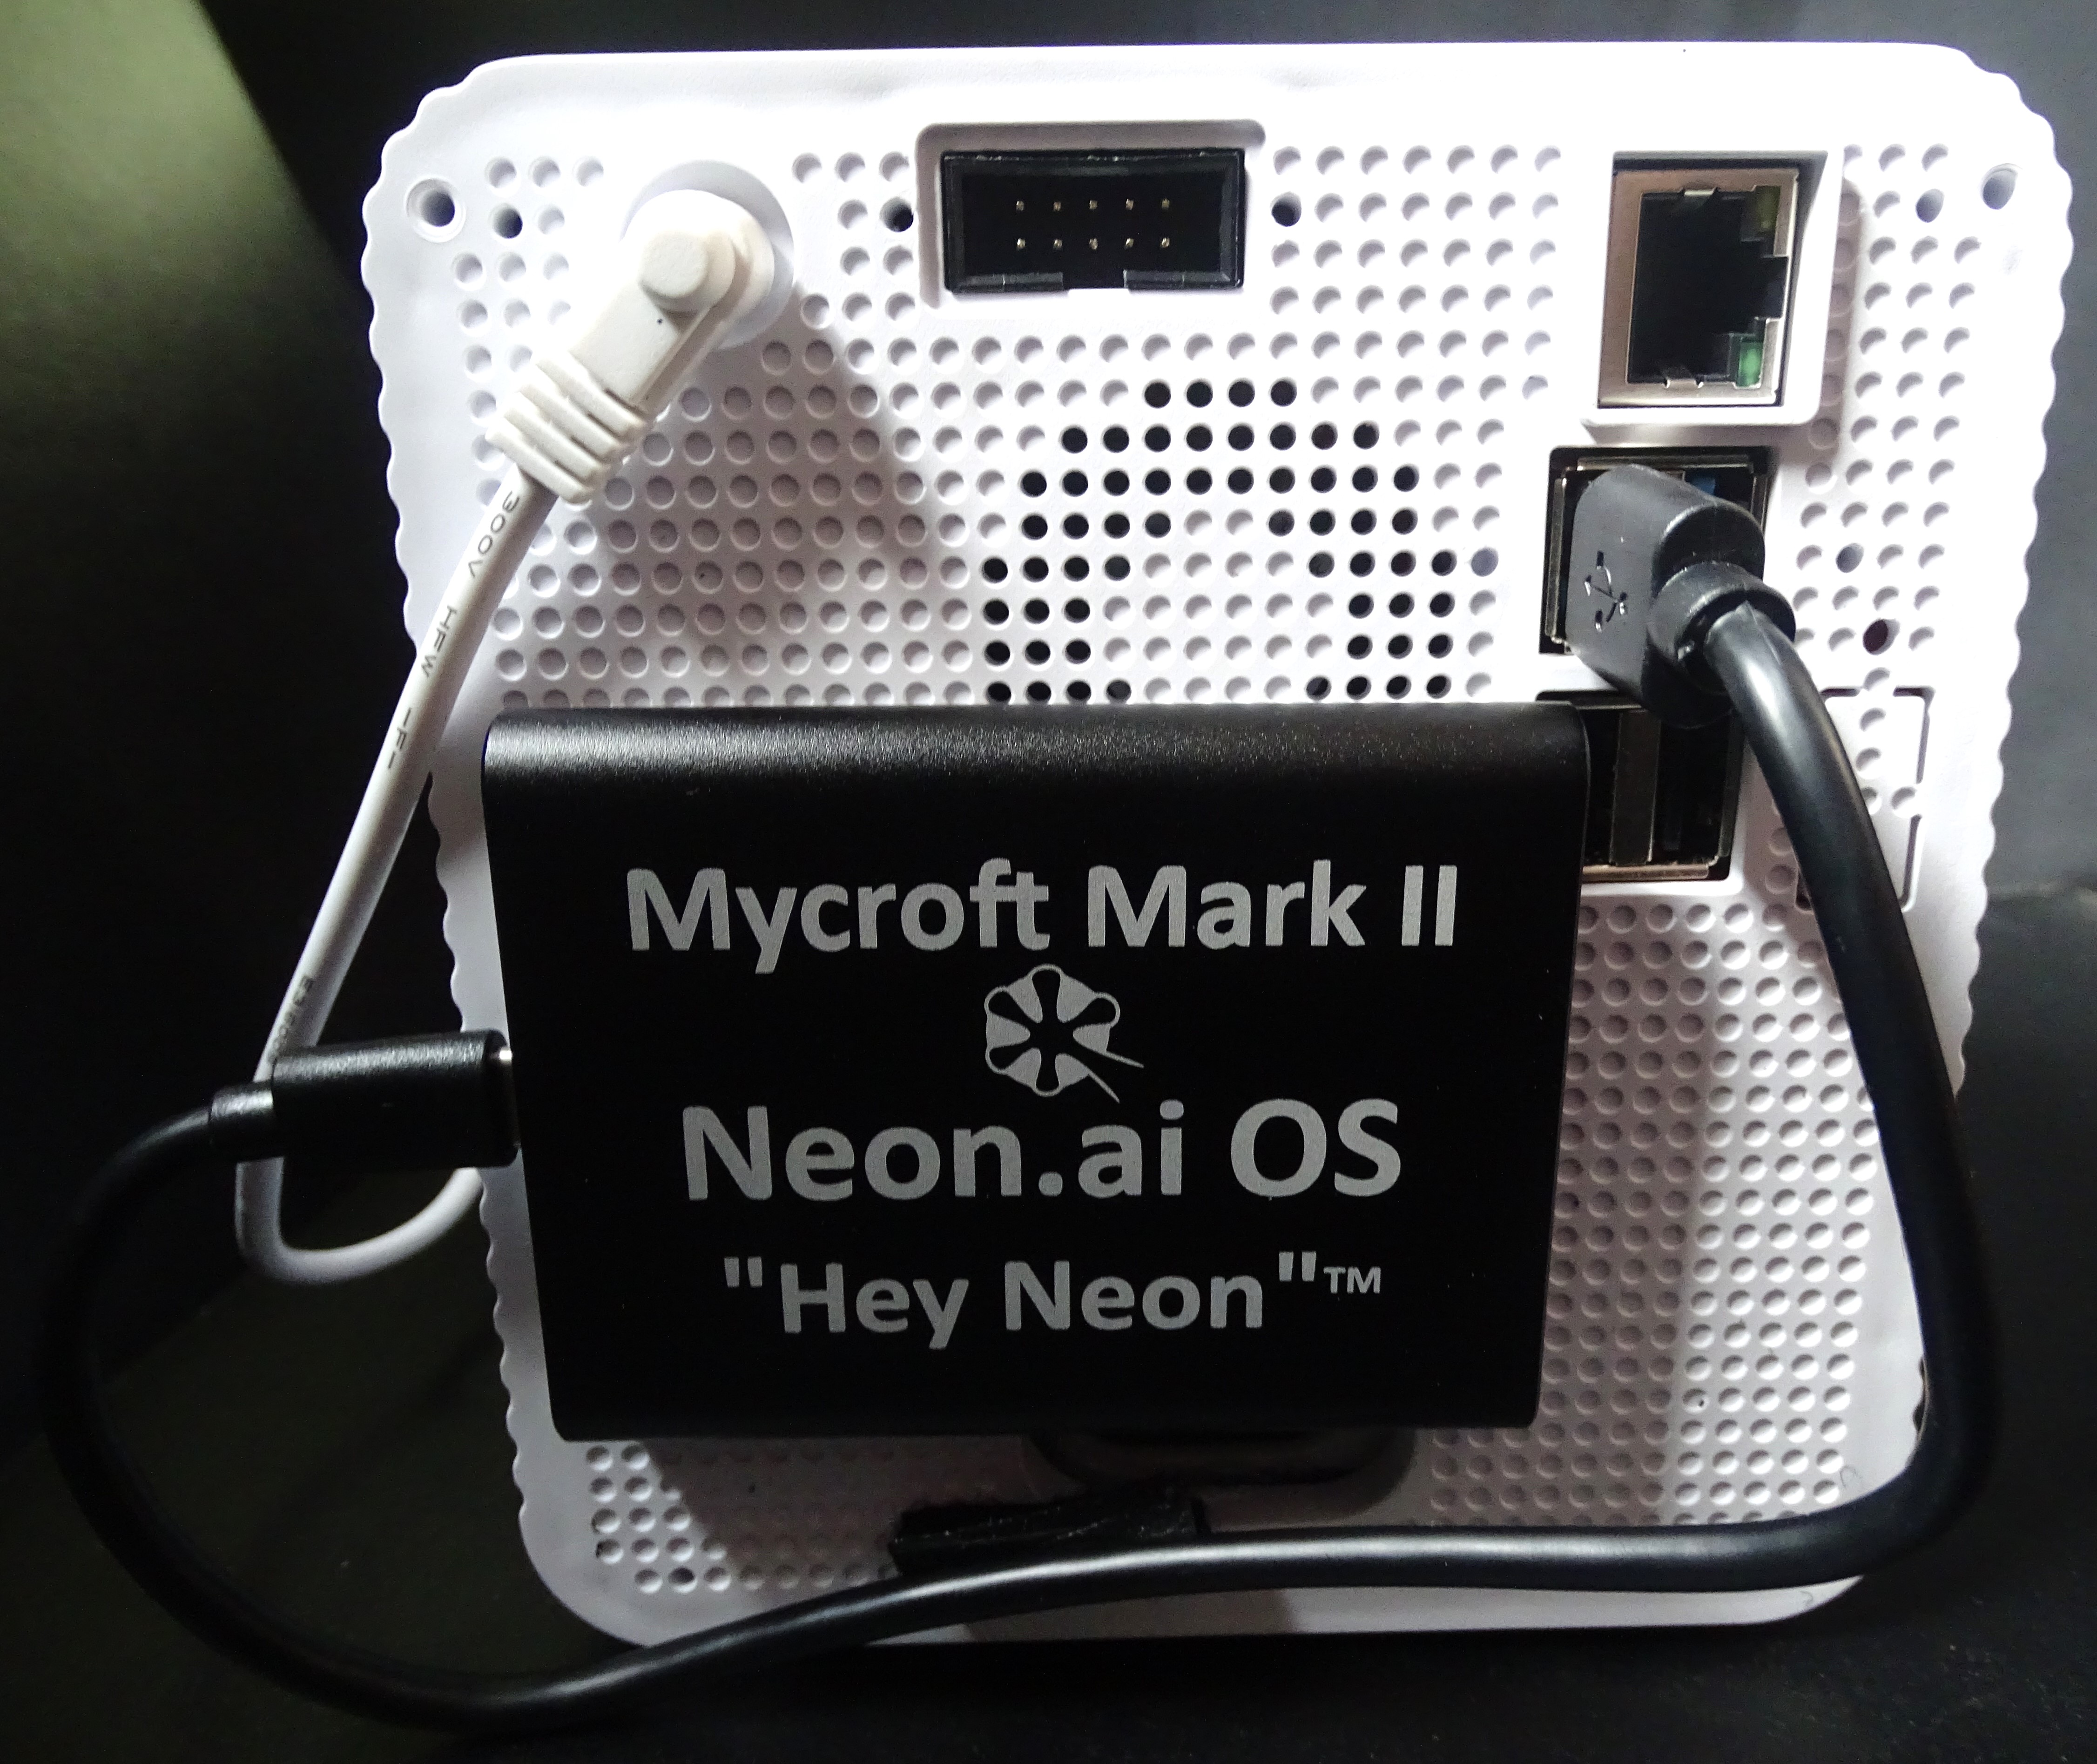 Neon branded SSD drive attached to the rear of a Mycroft Mark II